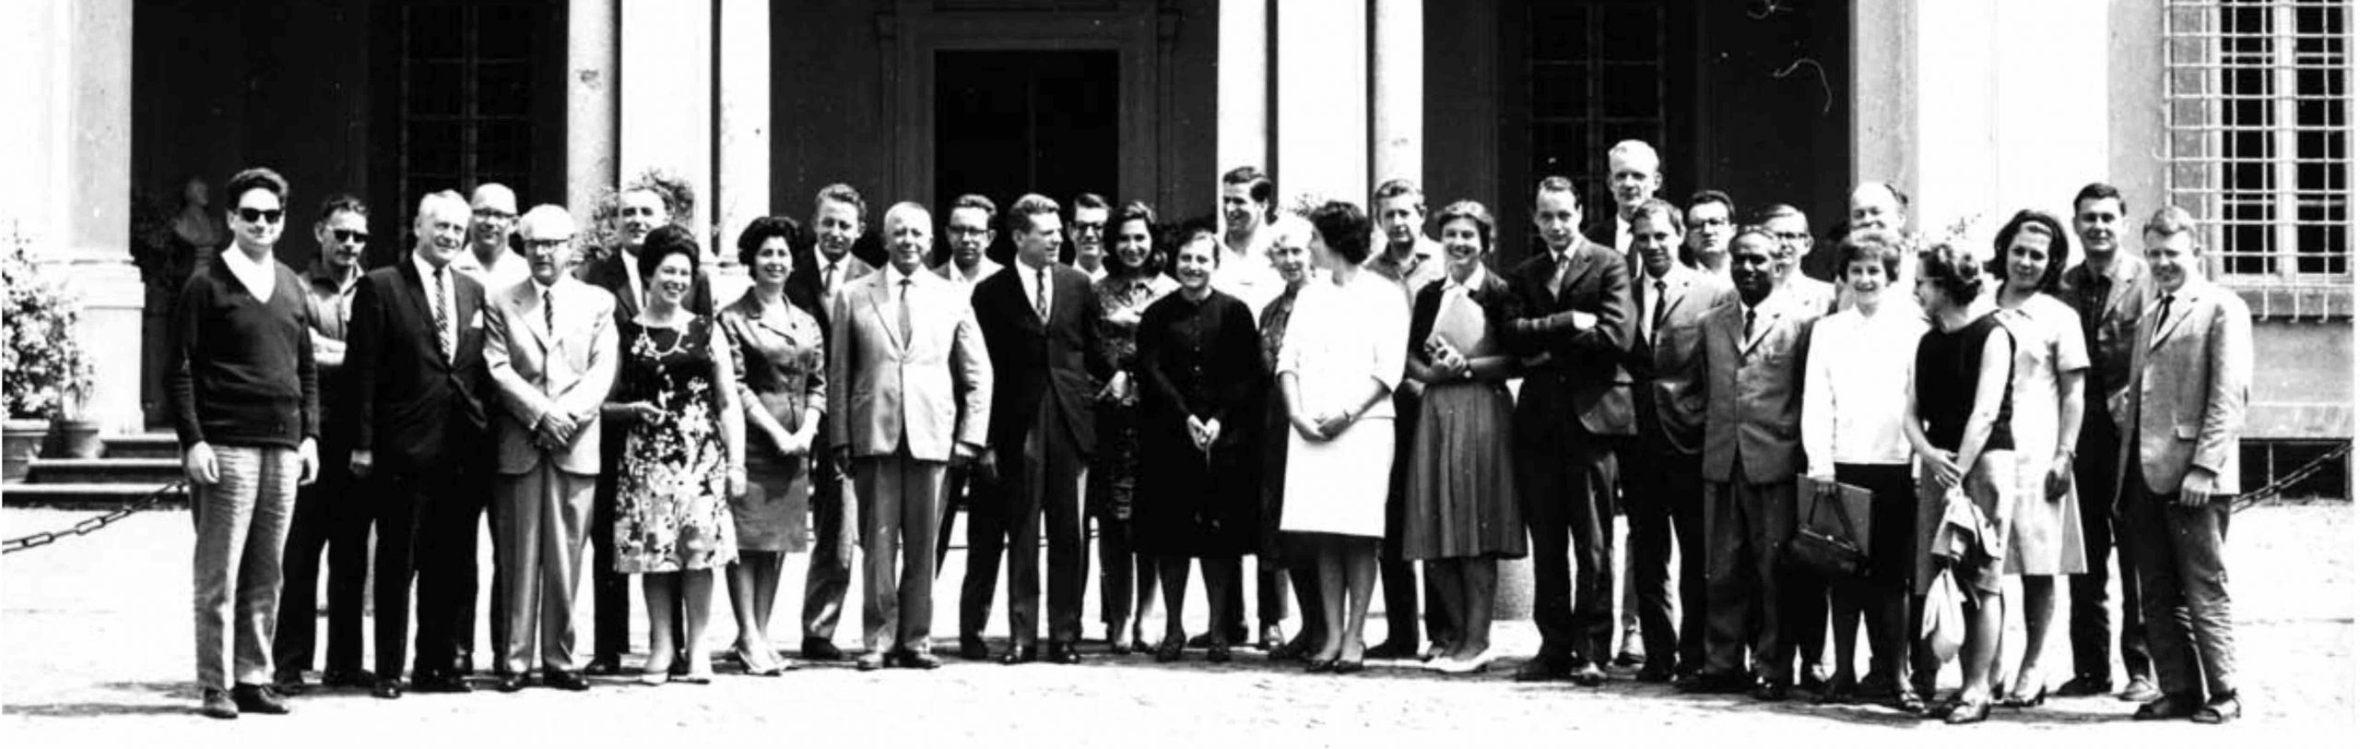 Participants in the first ISODARCO course on disarmament and arms control, directed by  Edoardo Amaldi, Rome, 13 – 25 June, 1966. Photo: courtesy ISODARCO.